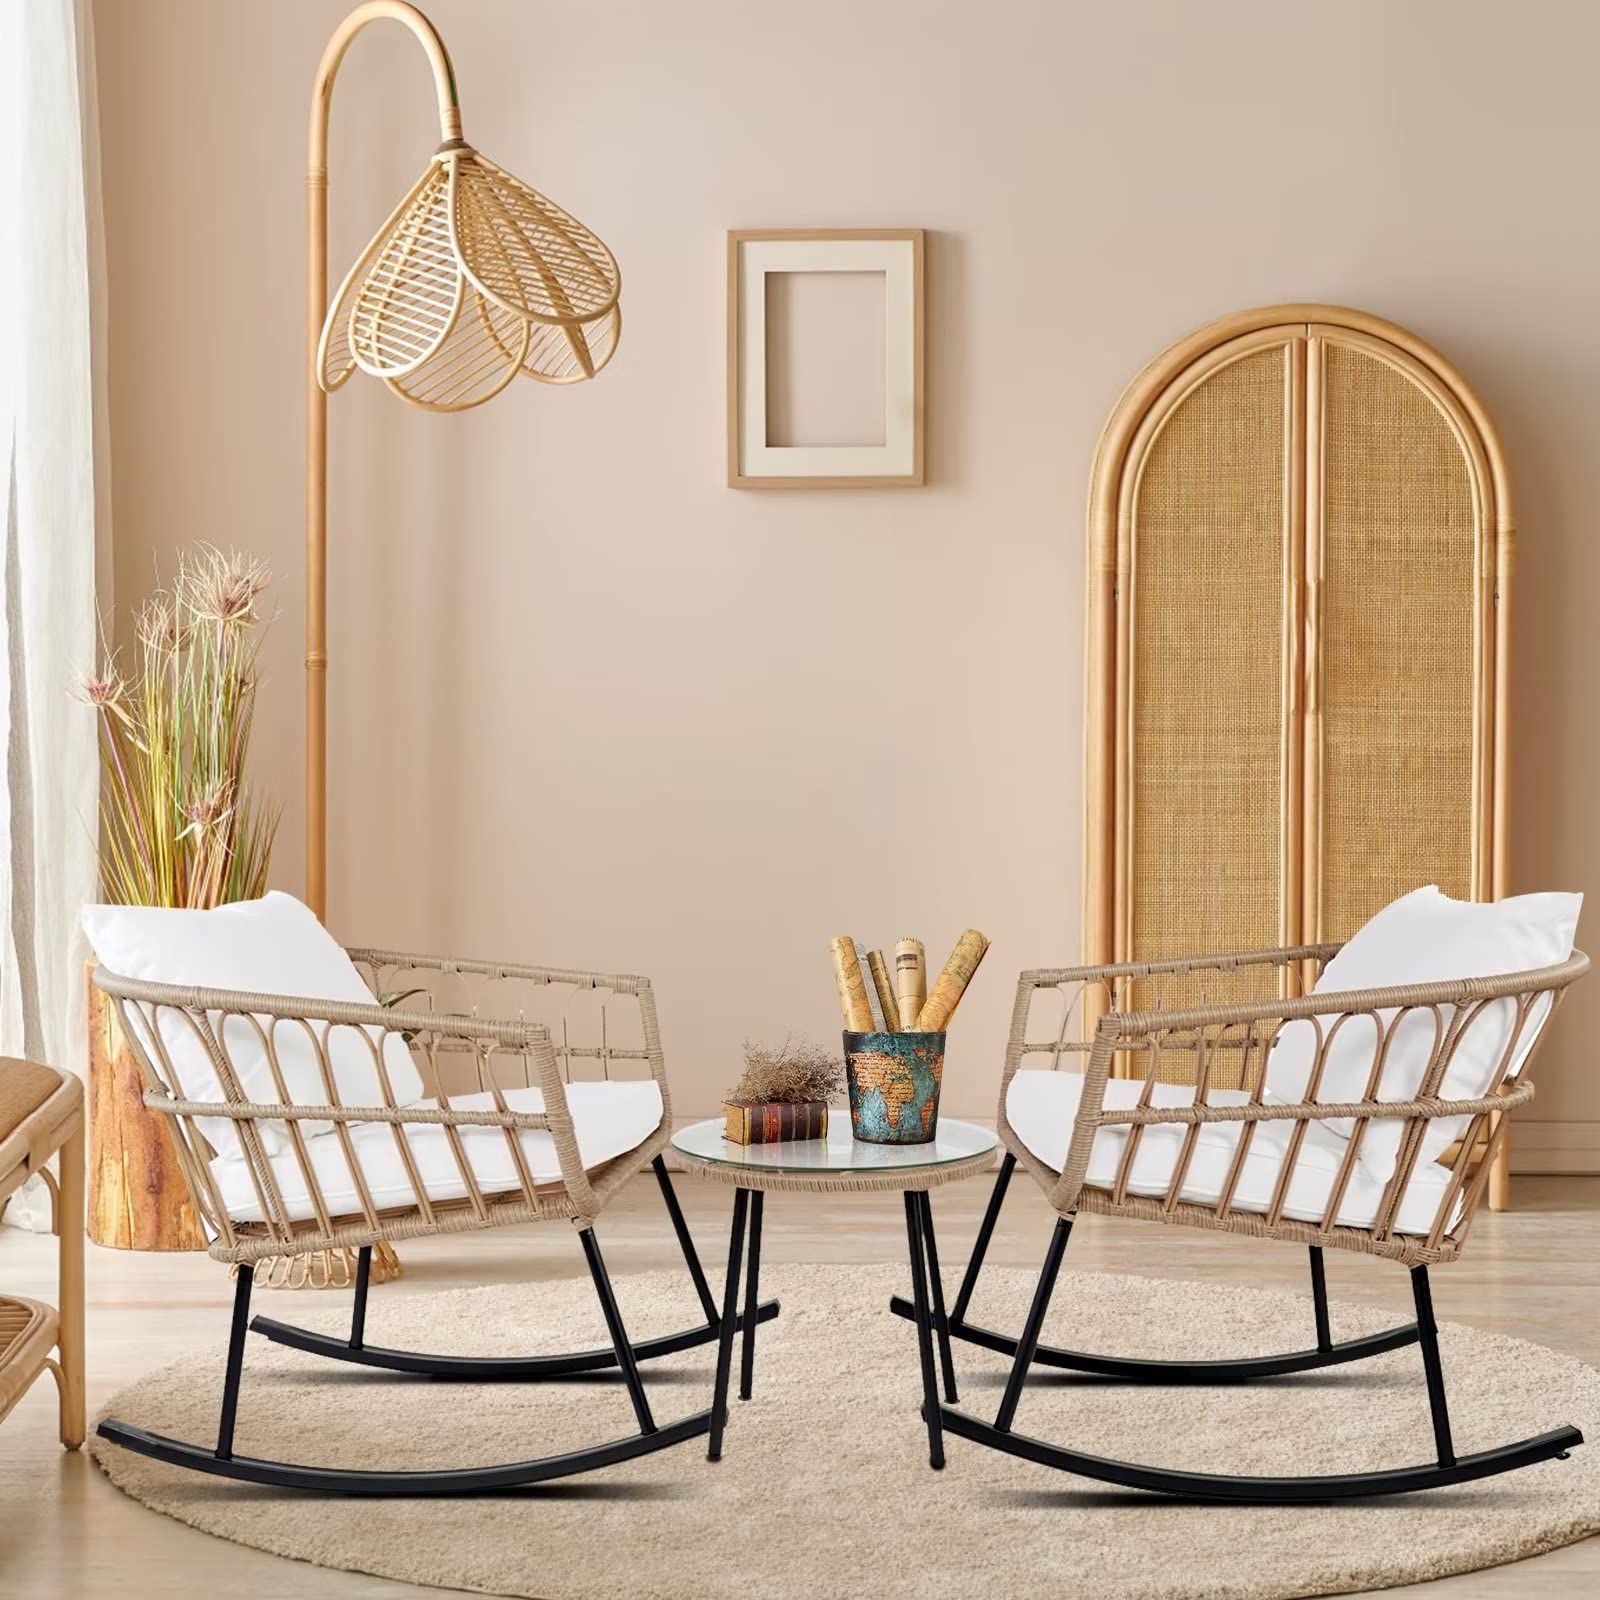 Most Up To Date Amazon: 3 Pieces Rocking Chairs Set, Boho Indoor Outdoor All Weather  Woven Rope Table Set, Tan Wicker Chat Set With White Cushions, Rattan Sets  For Balcony, Garden, Front Porch,indoor,living Rooms : Patio, Throughout 3 Piece Outdoor Boho Wicker Chat Set (Photo 6 of 15)